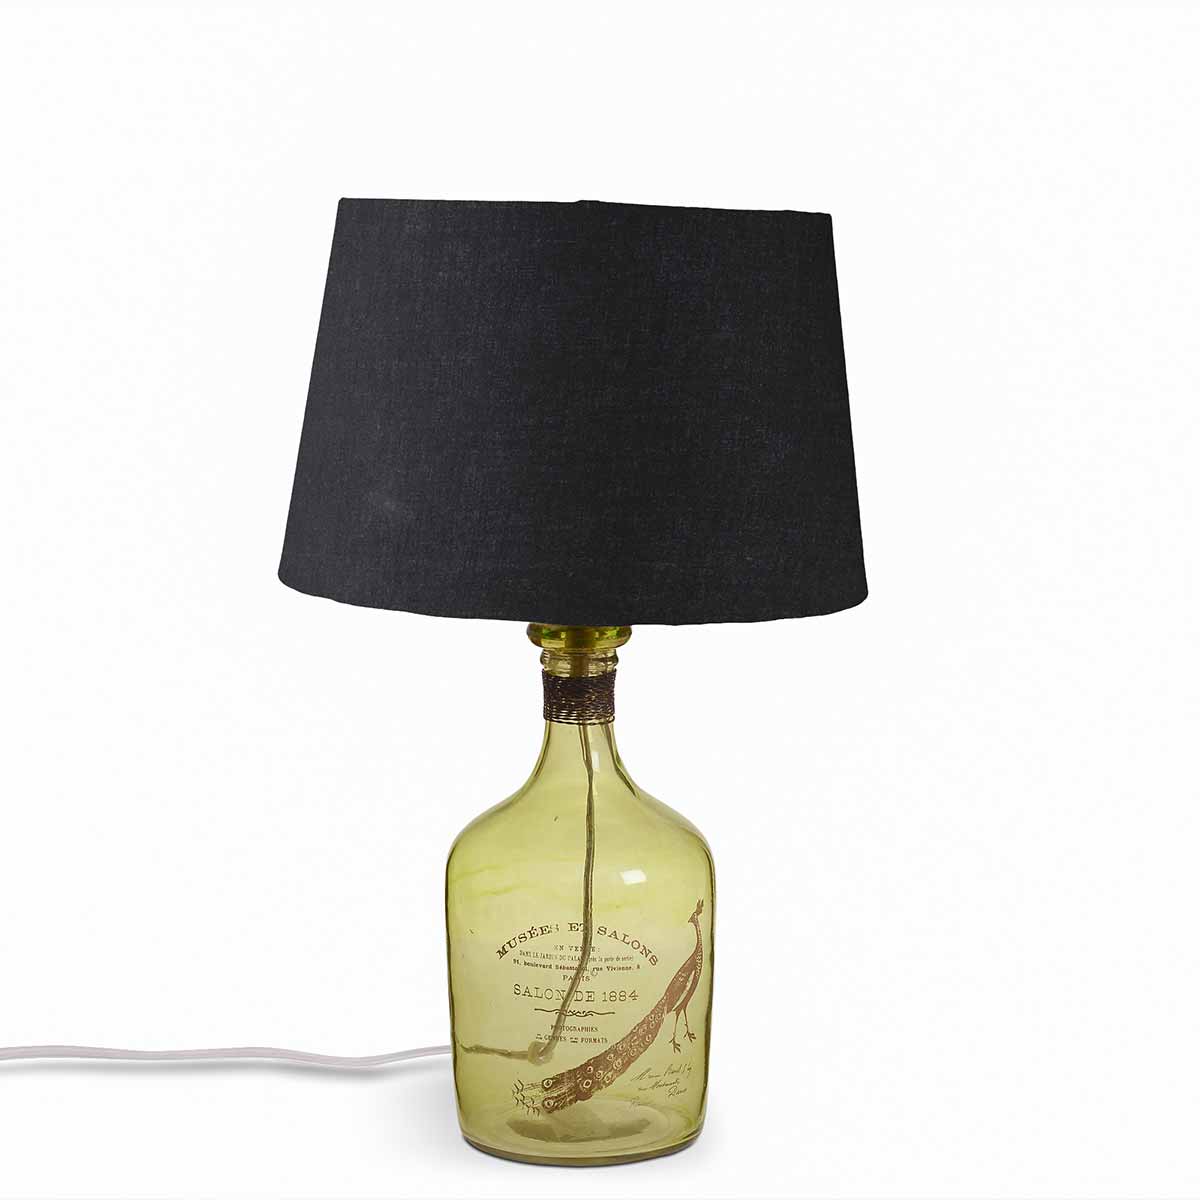 Online table lamp india